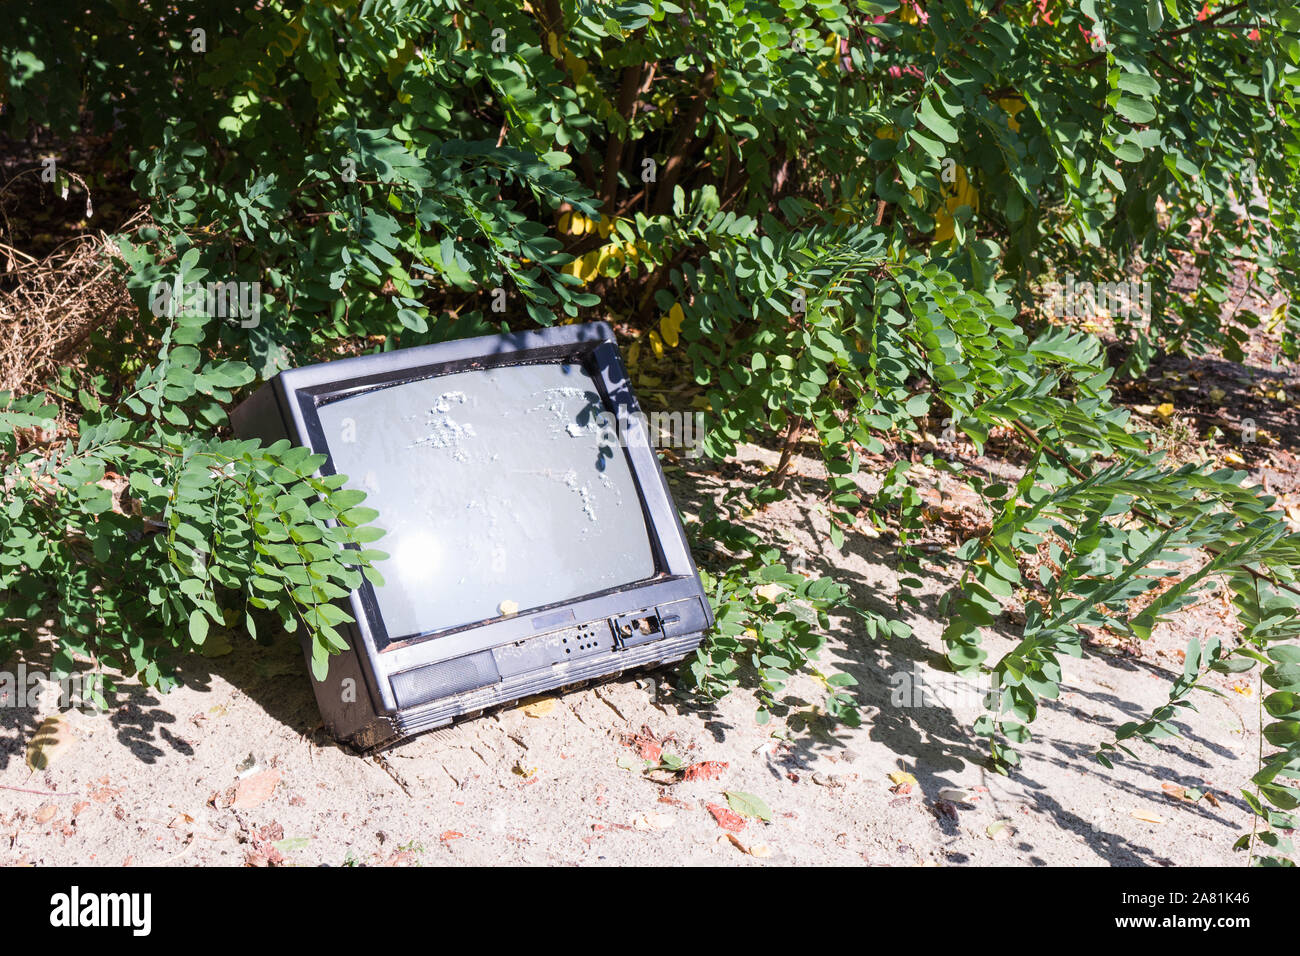 An old broken black television lays in garbage and bushes. Sun light reflection. Stock Photo